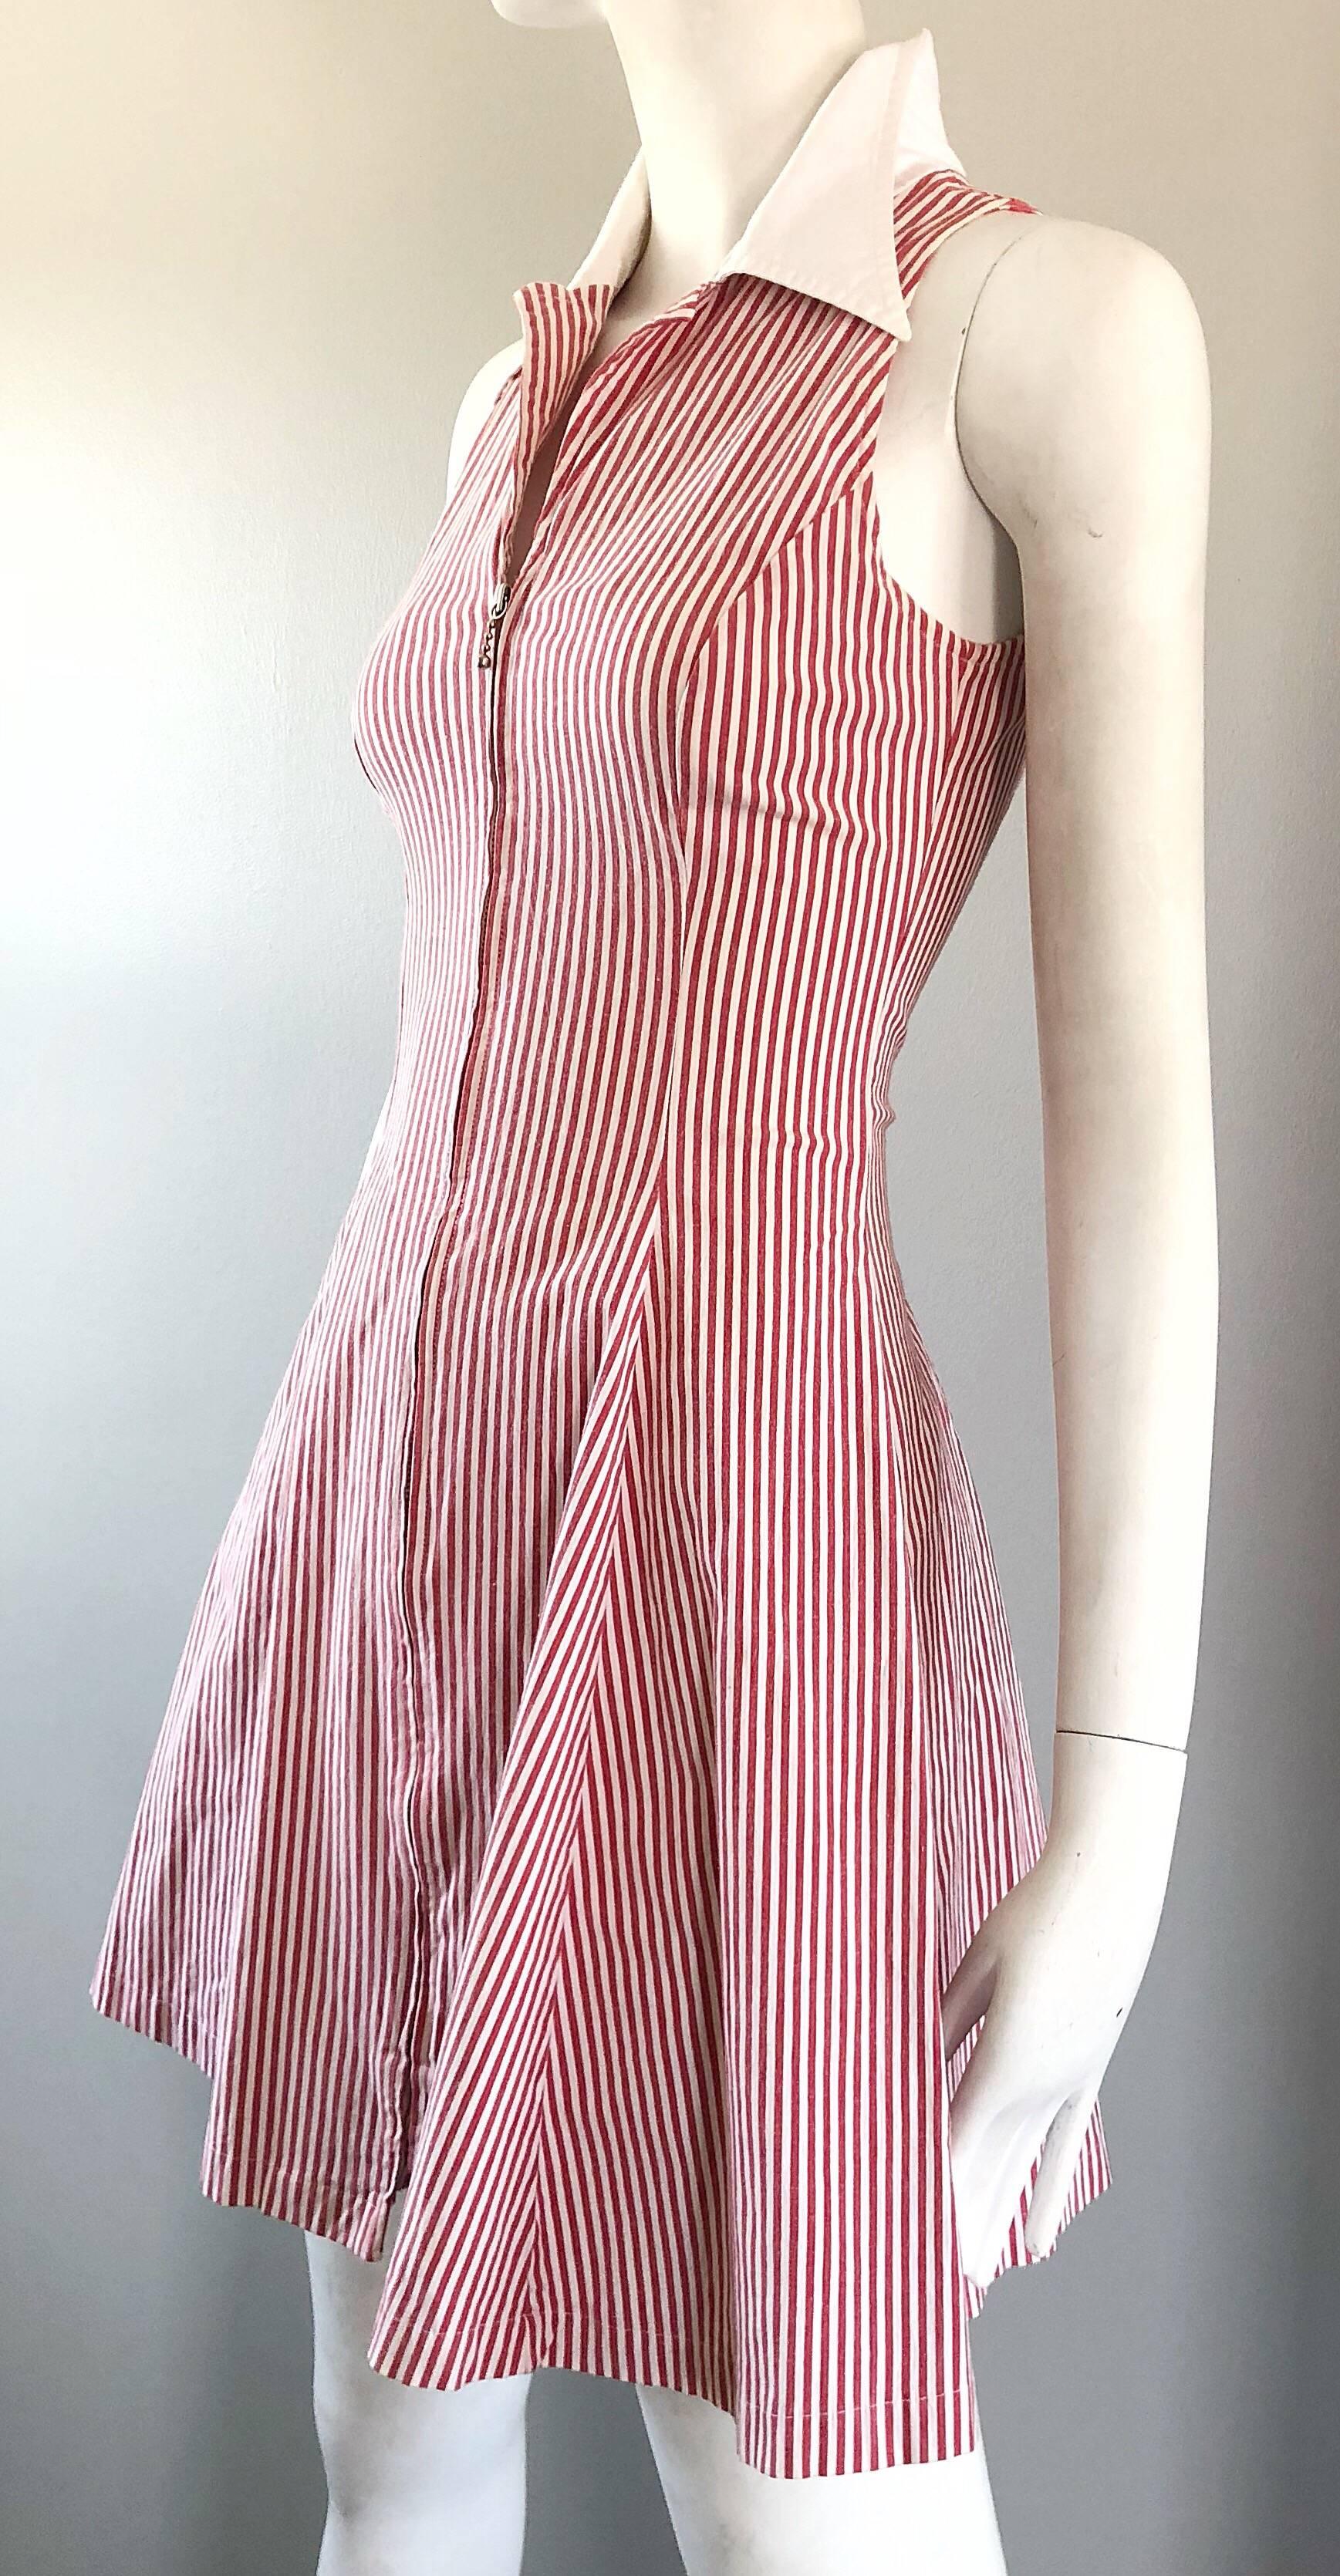 Beige 1980s Angelo Tarlazzi Vintage Red and White Seersucker Nautical Striped Dress  For Sale